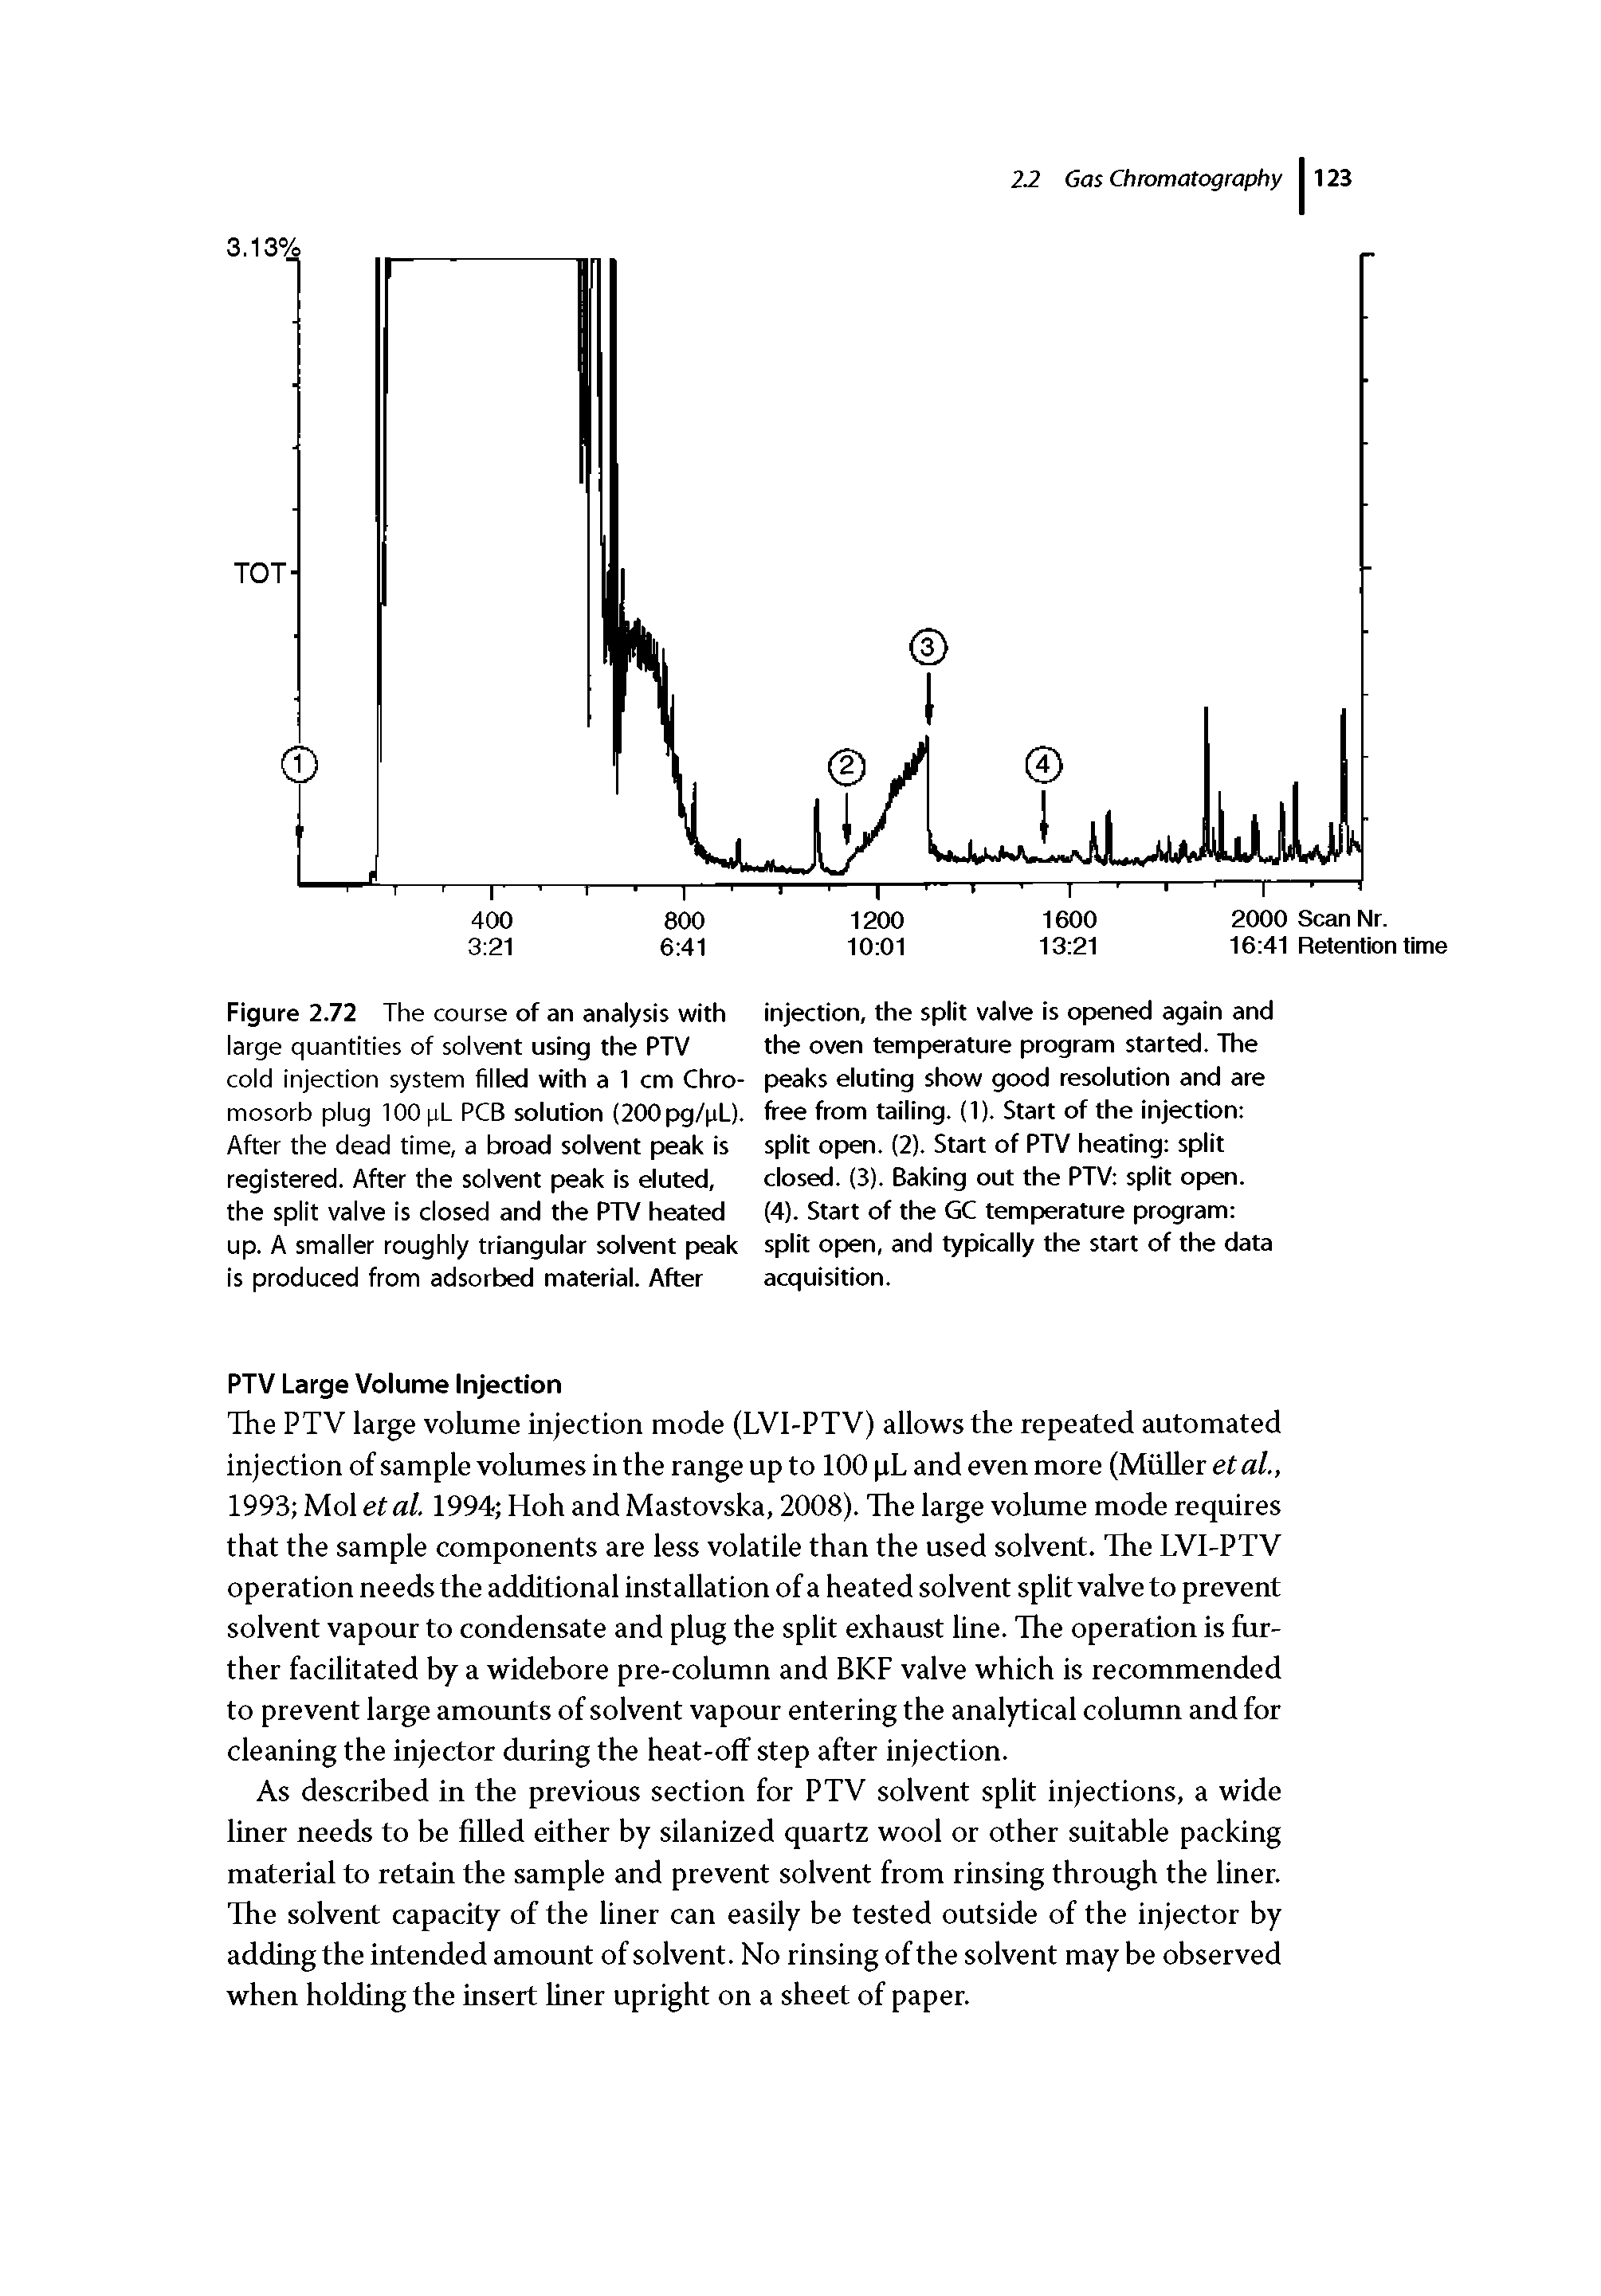 Figure 2.72 The course of an analysis with large quantities of solvent using the PTV cold injection system filled with a 1 cm Chro-mosorb plug lOOpL PCB solution (200pg/ jL). After the dead time, a broad solvent peak is registered. After the solvent peak is eluted, the split valve is closed and the PTV heated up. A smaller roughly triangular solvent peak is produced from adsorbed material. After...